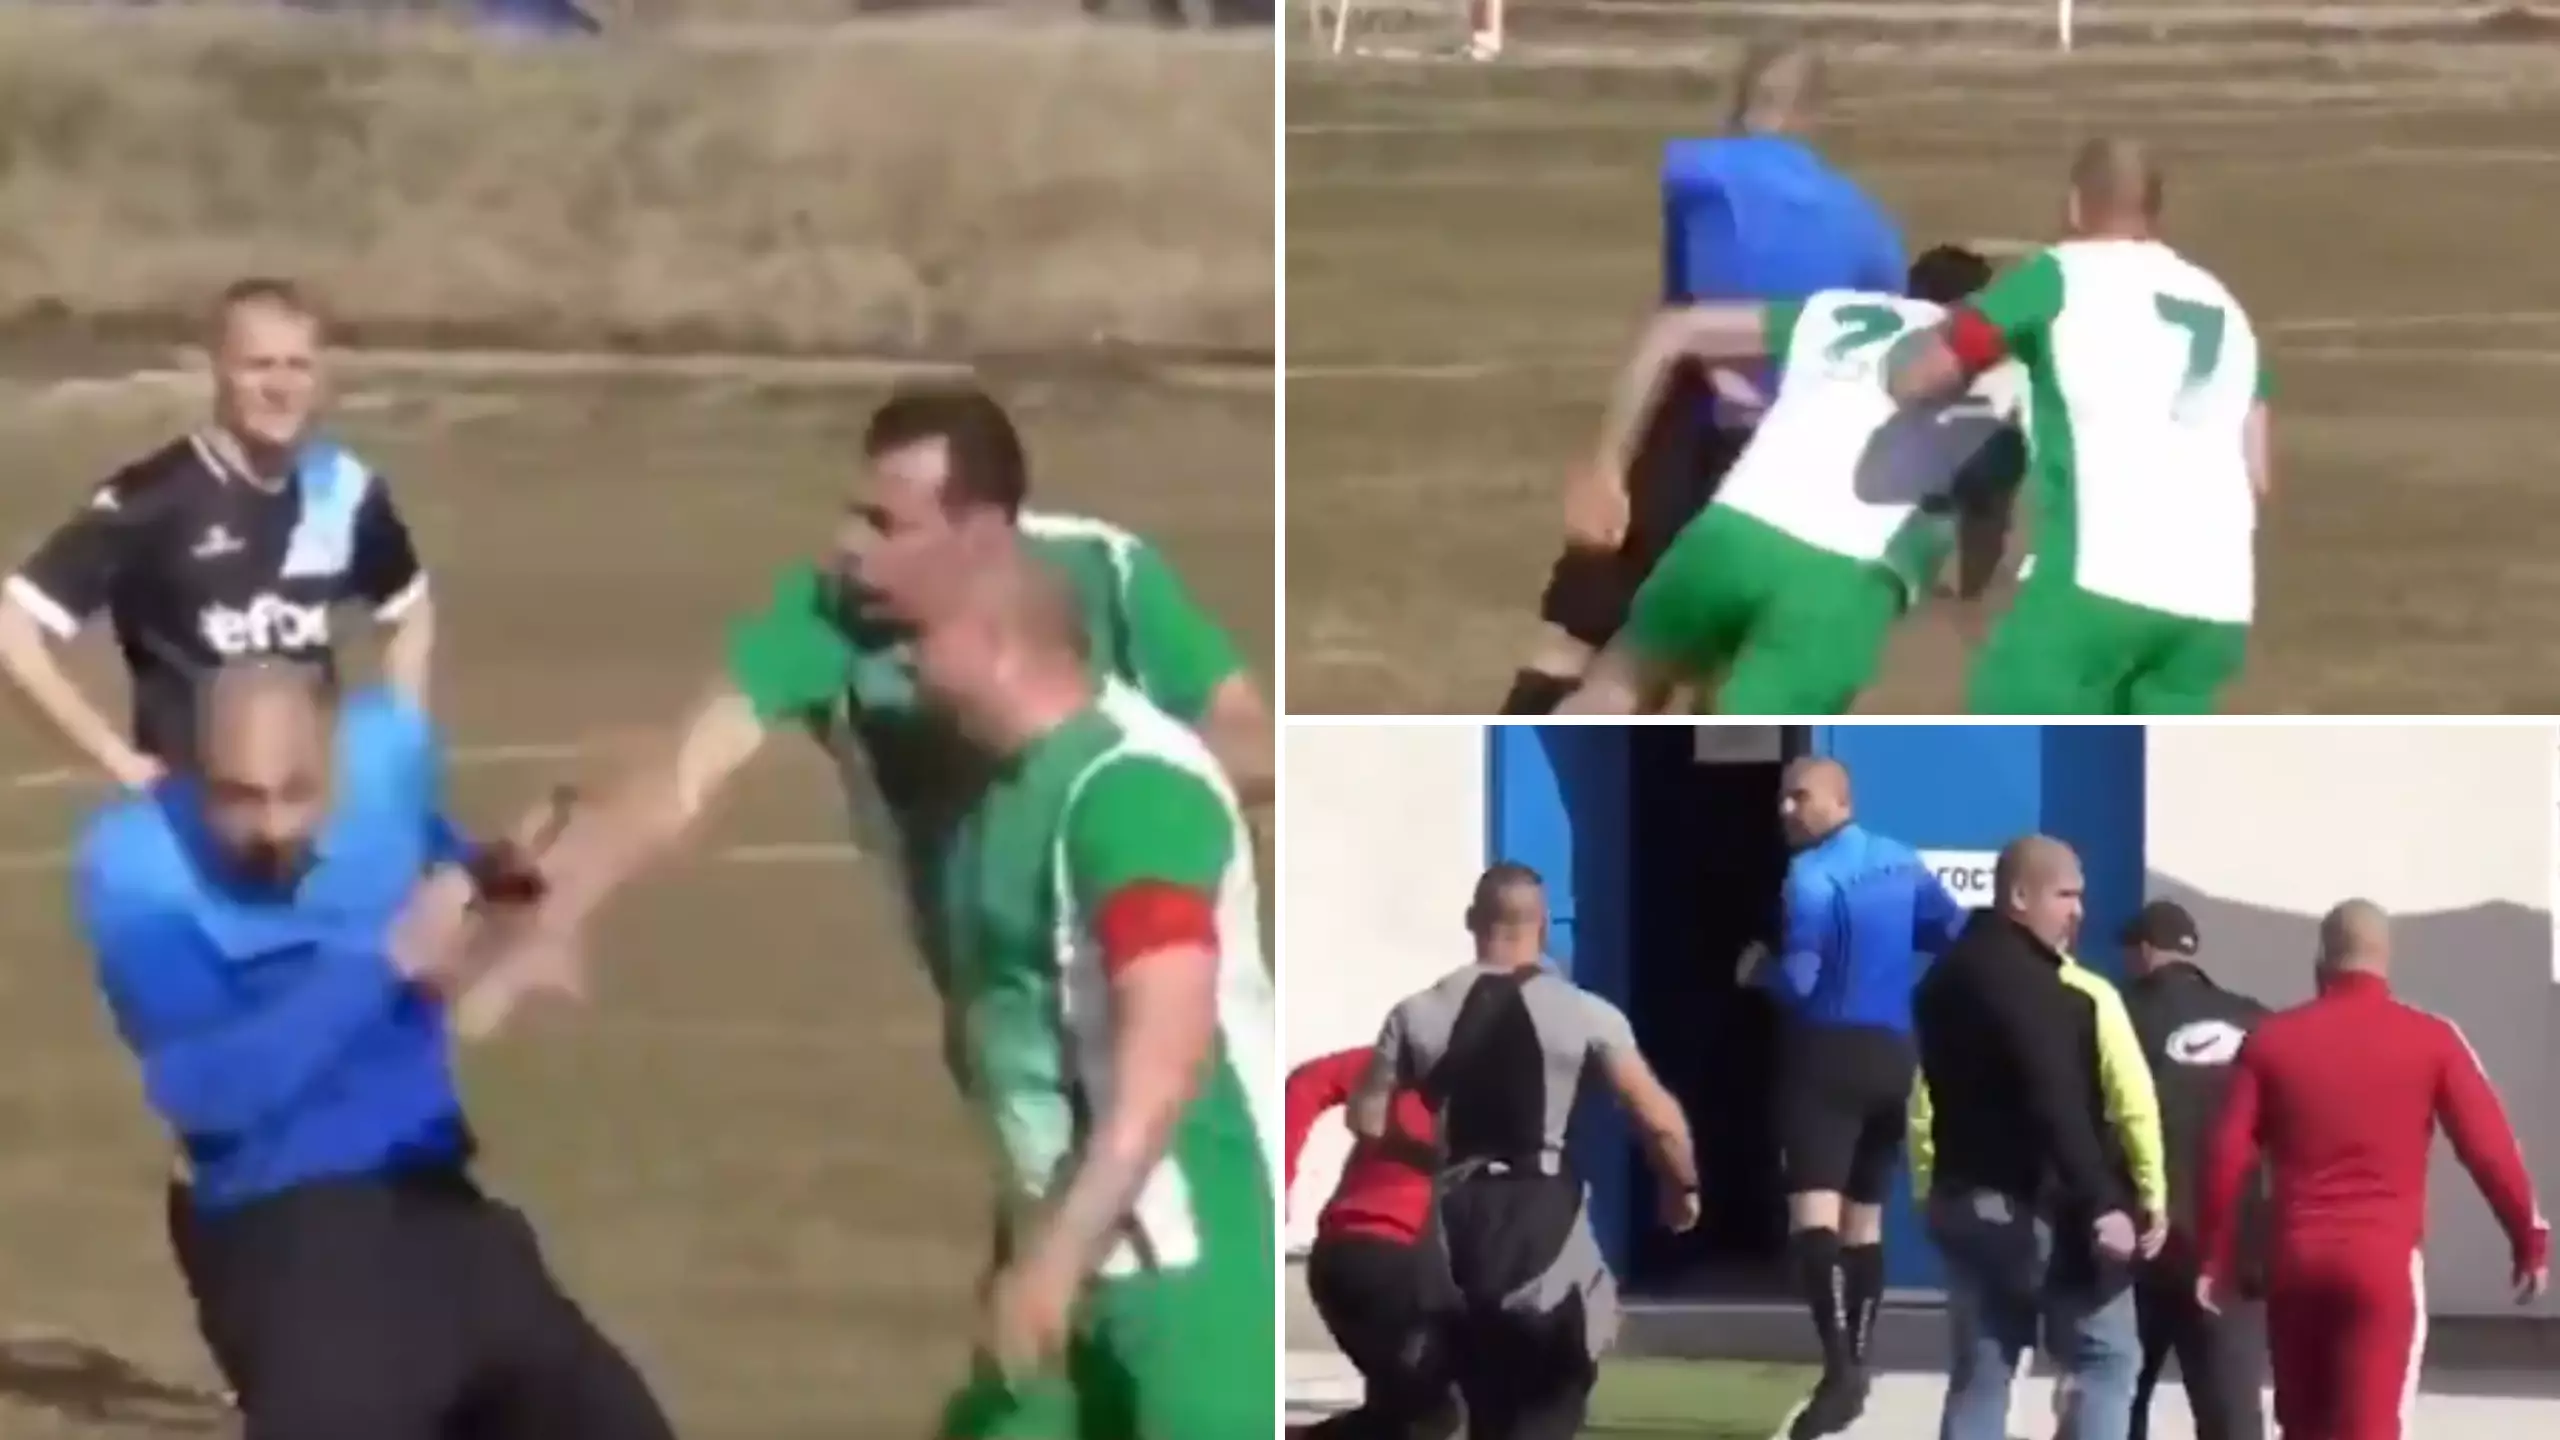 A Referee Has Been Chased Off The Pitch By Players And Other Officials And The Footage Is Unbelievable